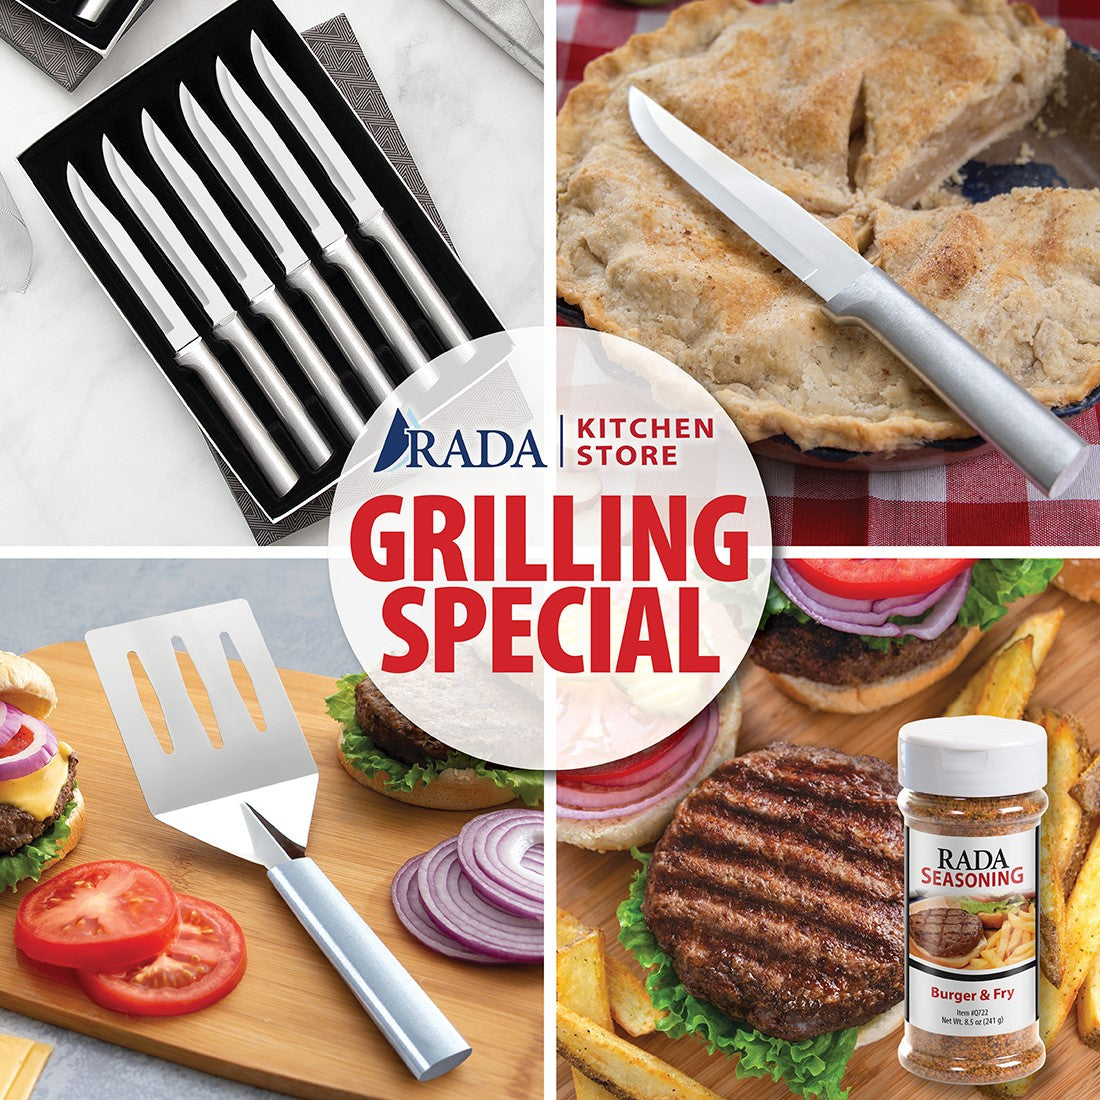 https://cdn.shopify.com/s/files/1/1842/3947/products/grillingspecial_1600x.jpg?v=1652230883